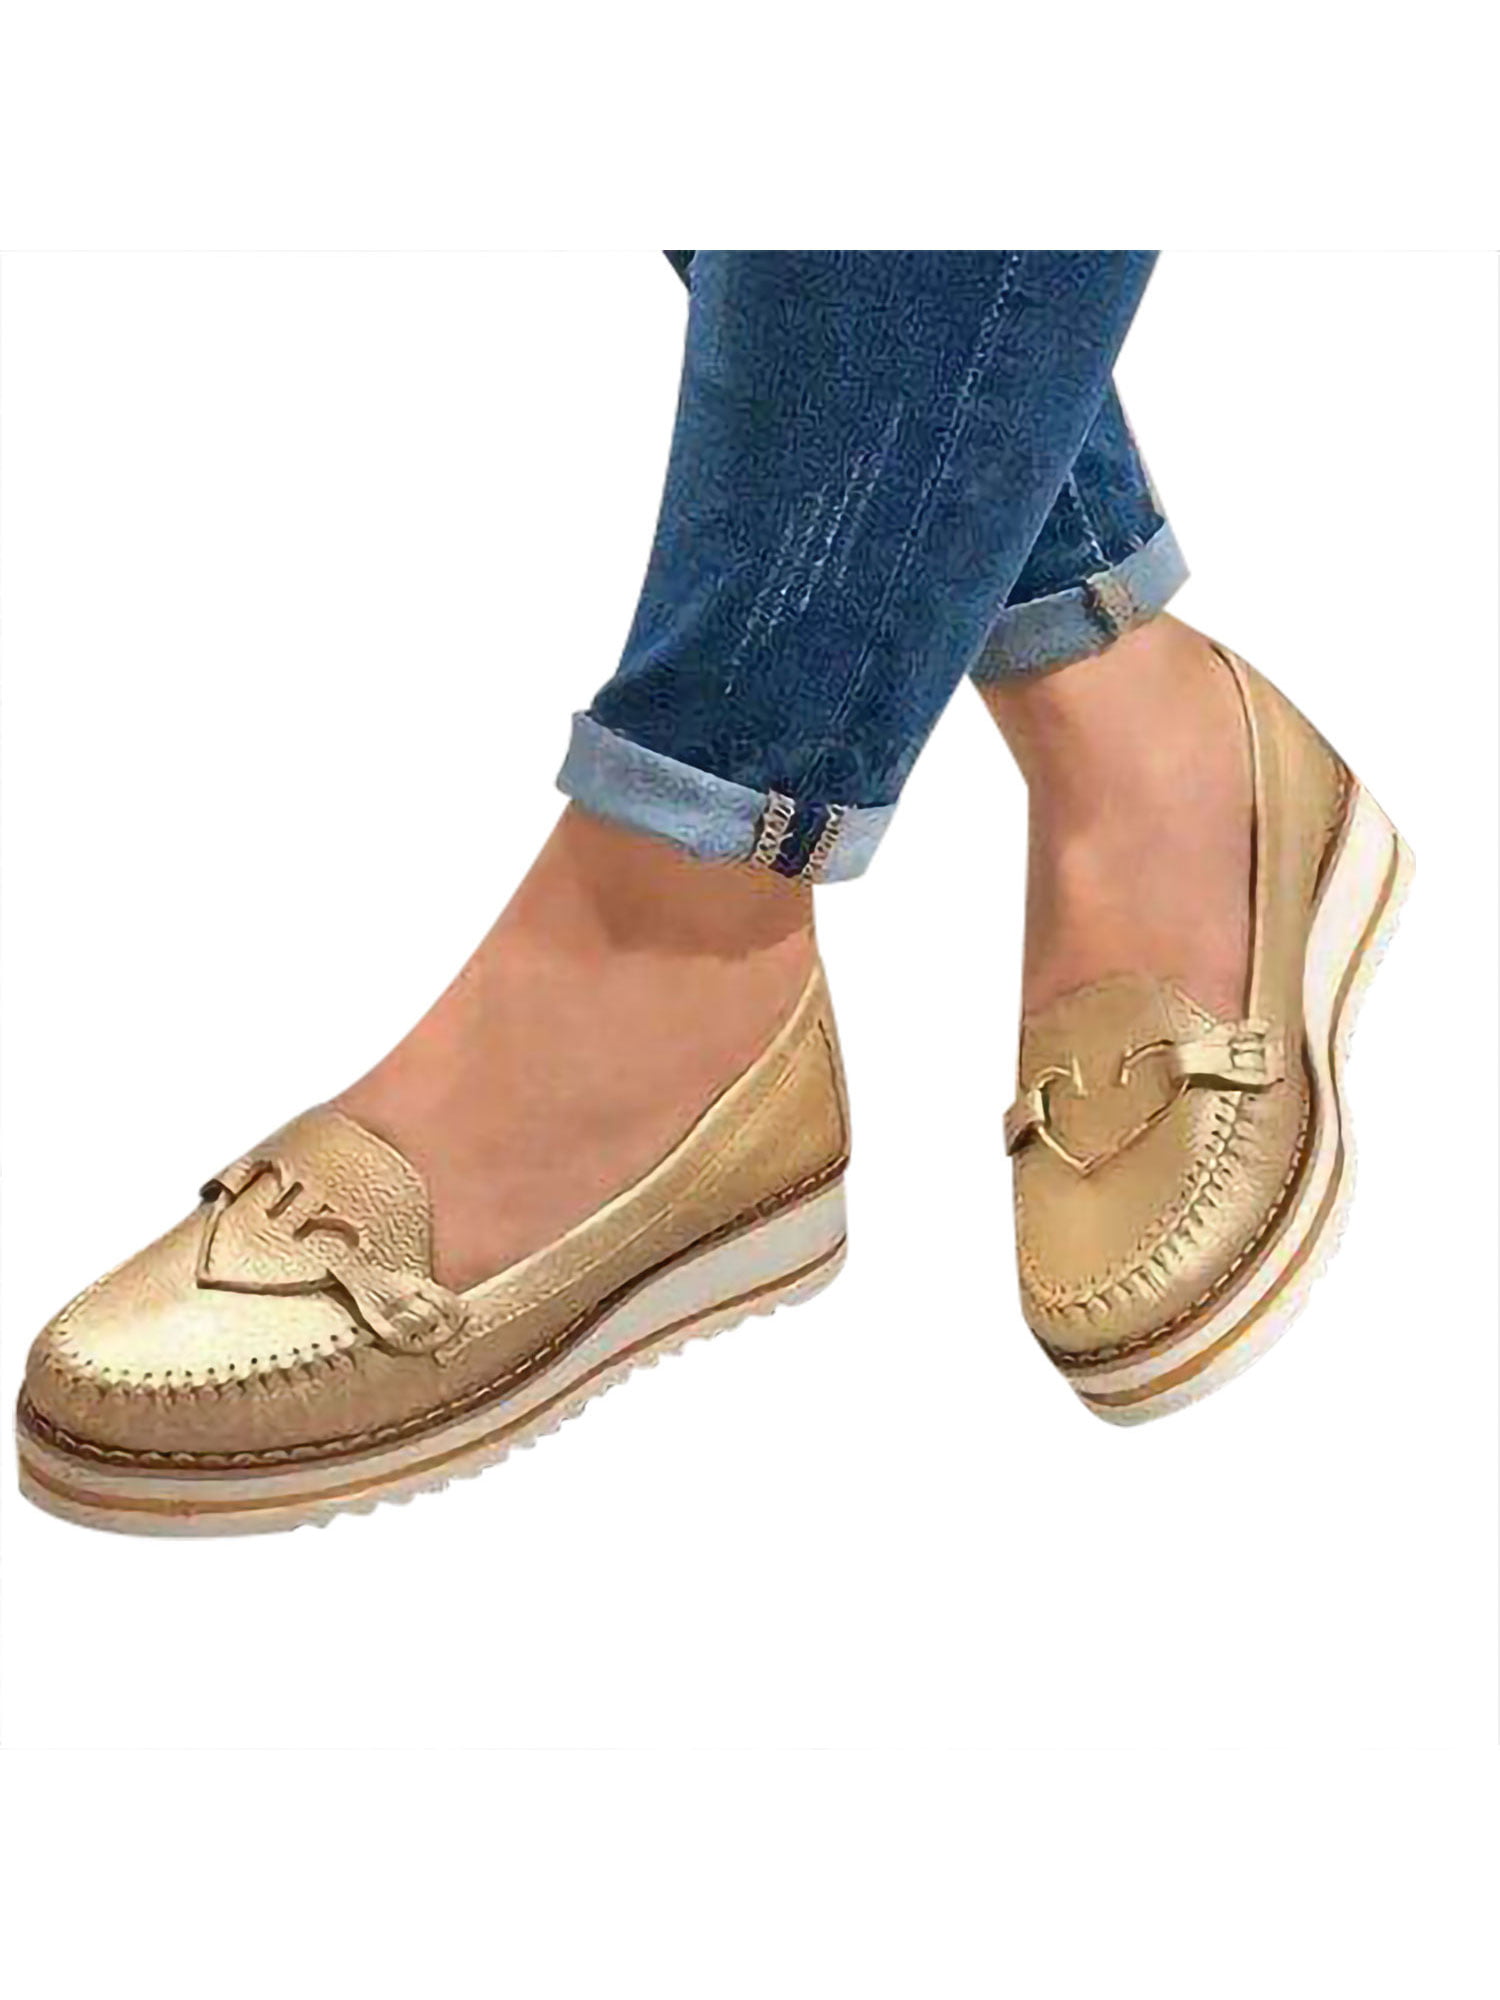 2020 Womens Slip On PU Leather Pumps Trainers Loafers Ladies Flats Comfy Shoes